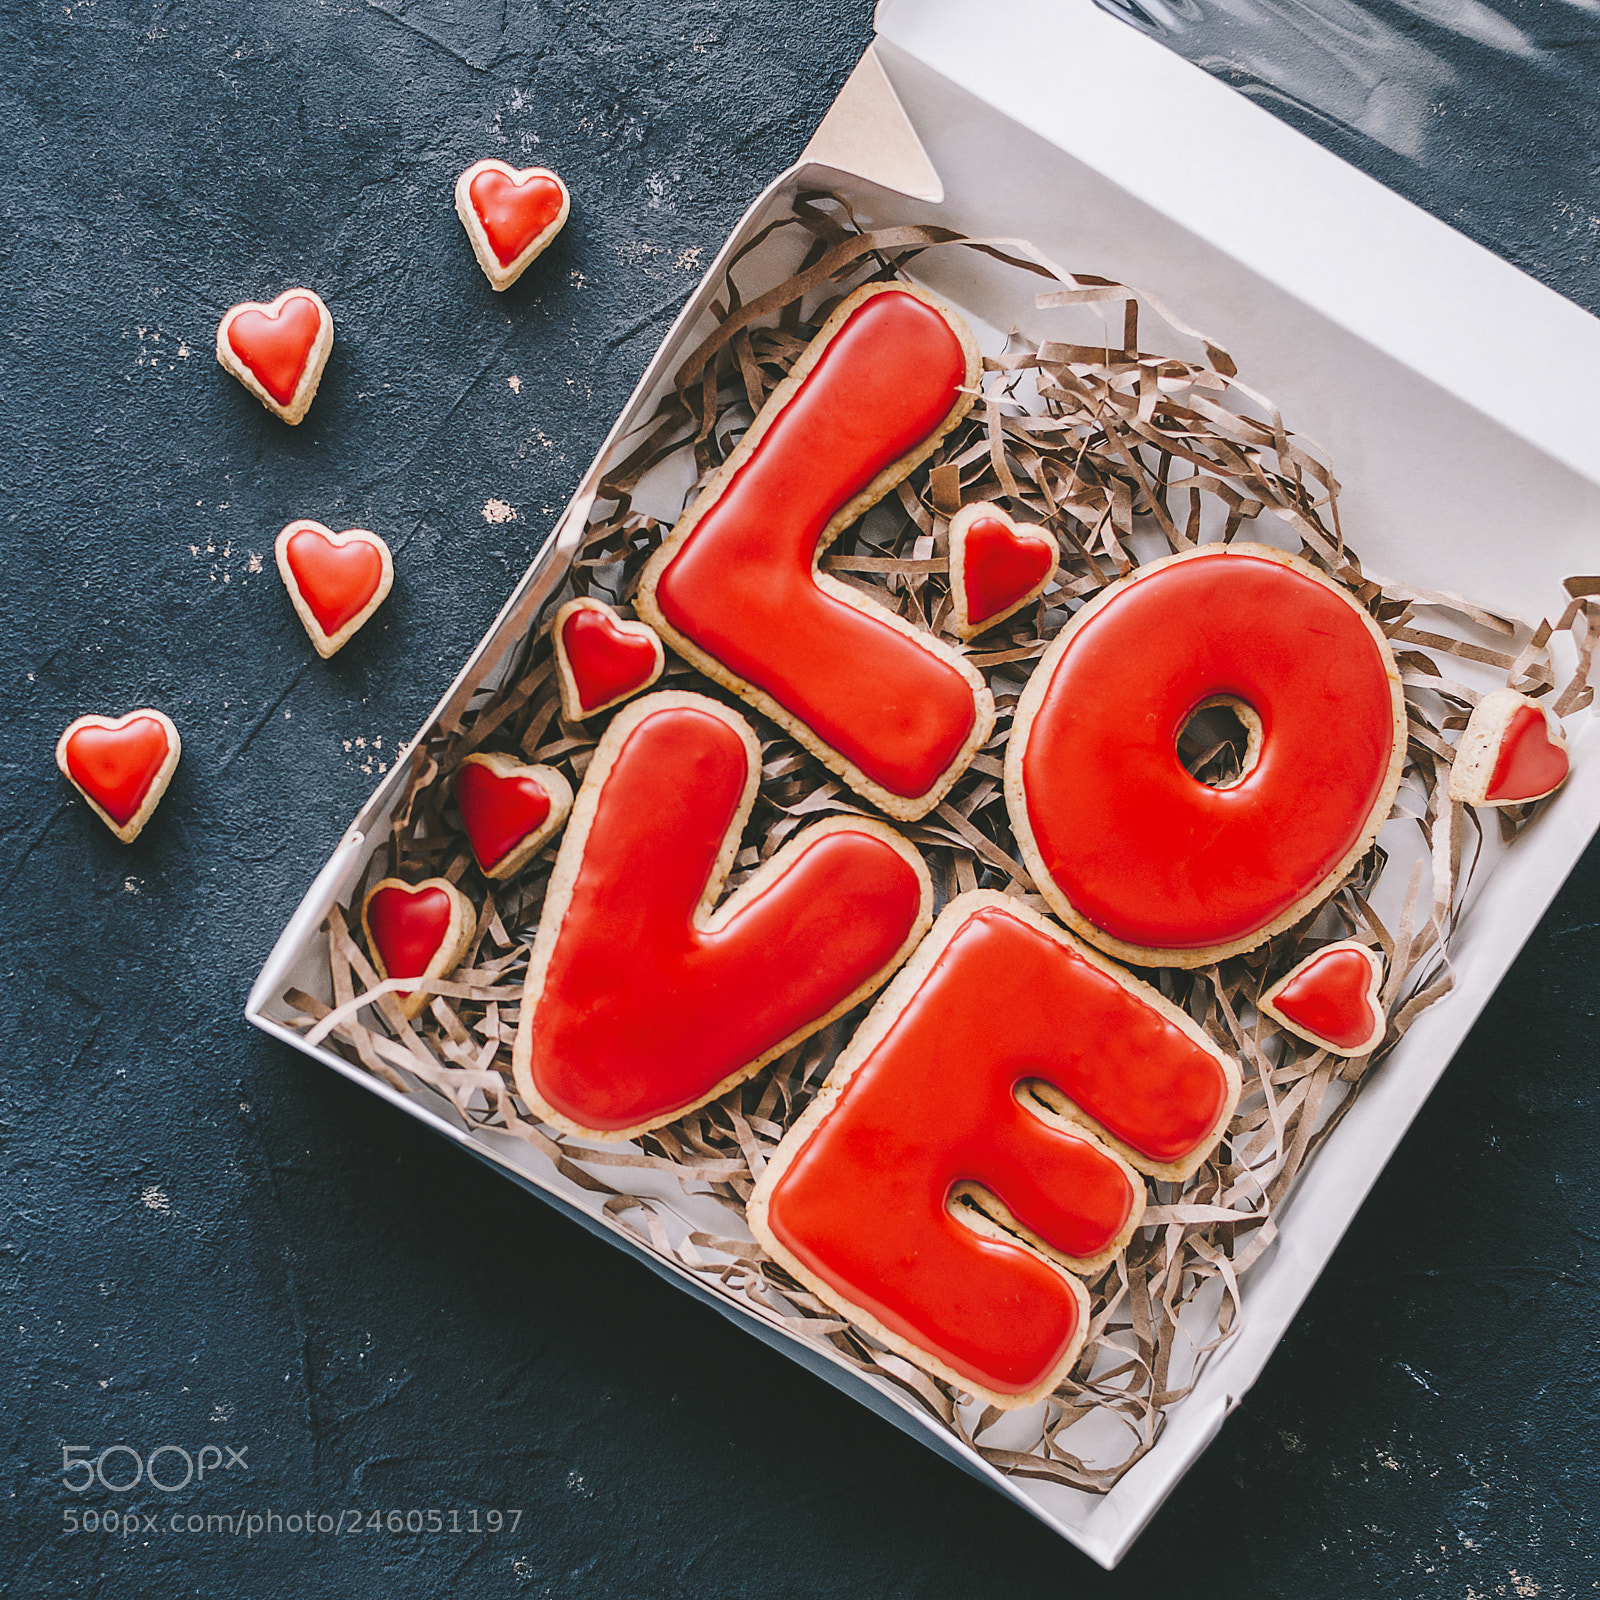 Nikon D7000 sample photo. Red heart cookies photography